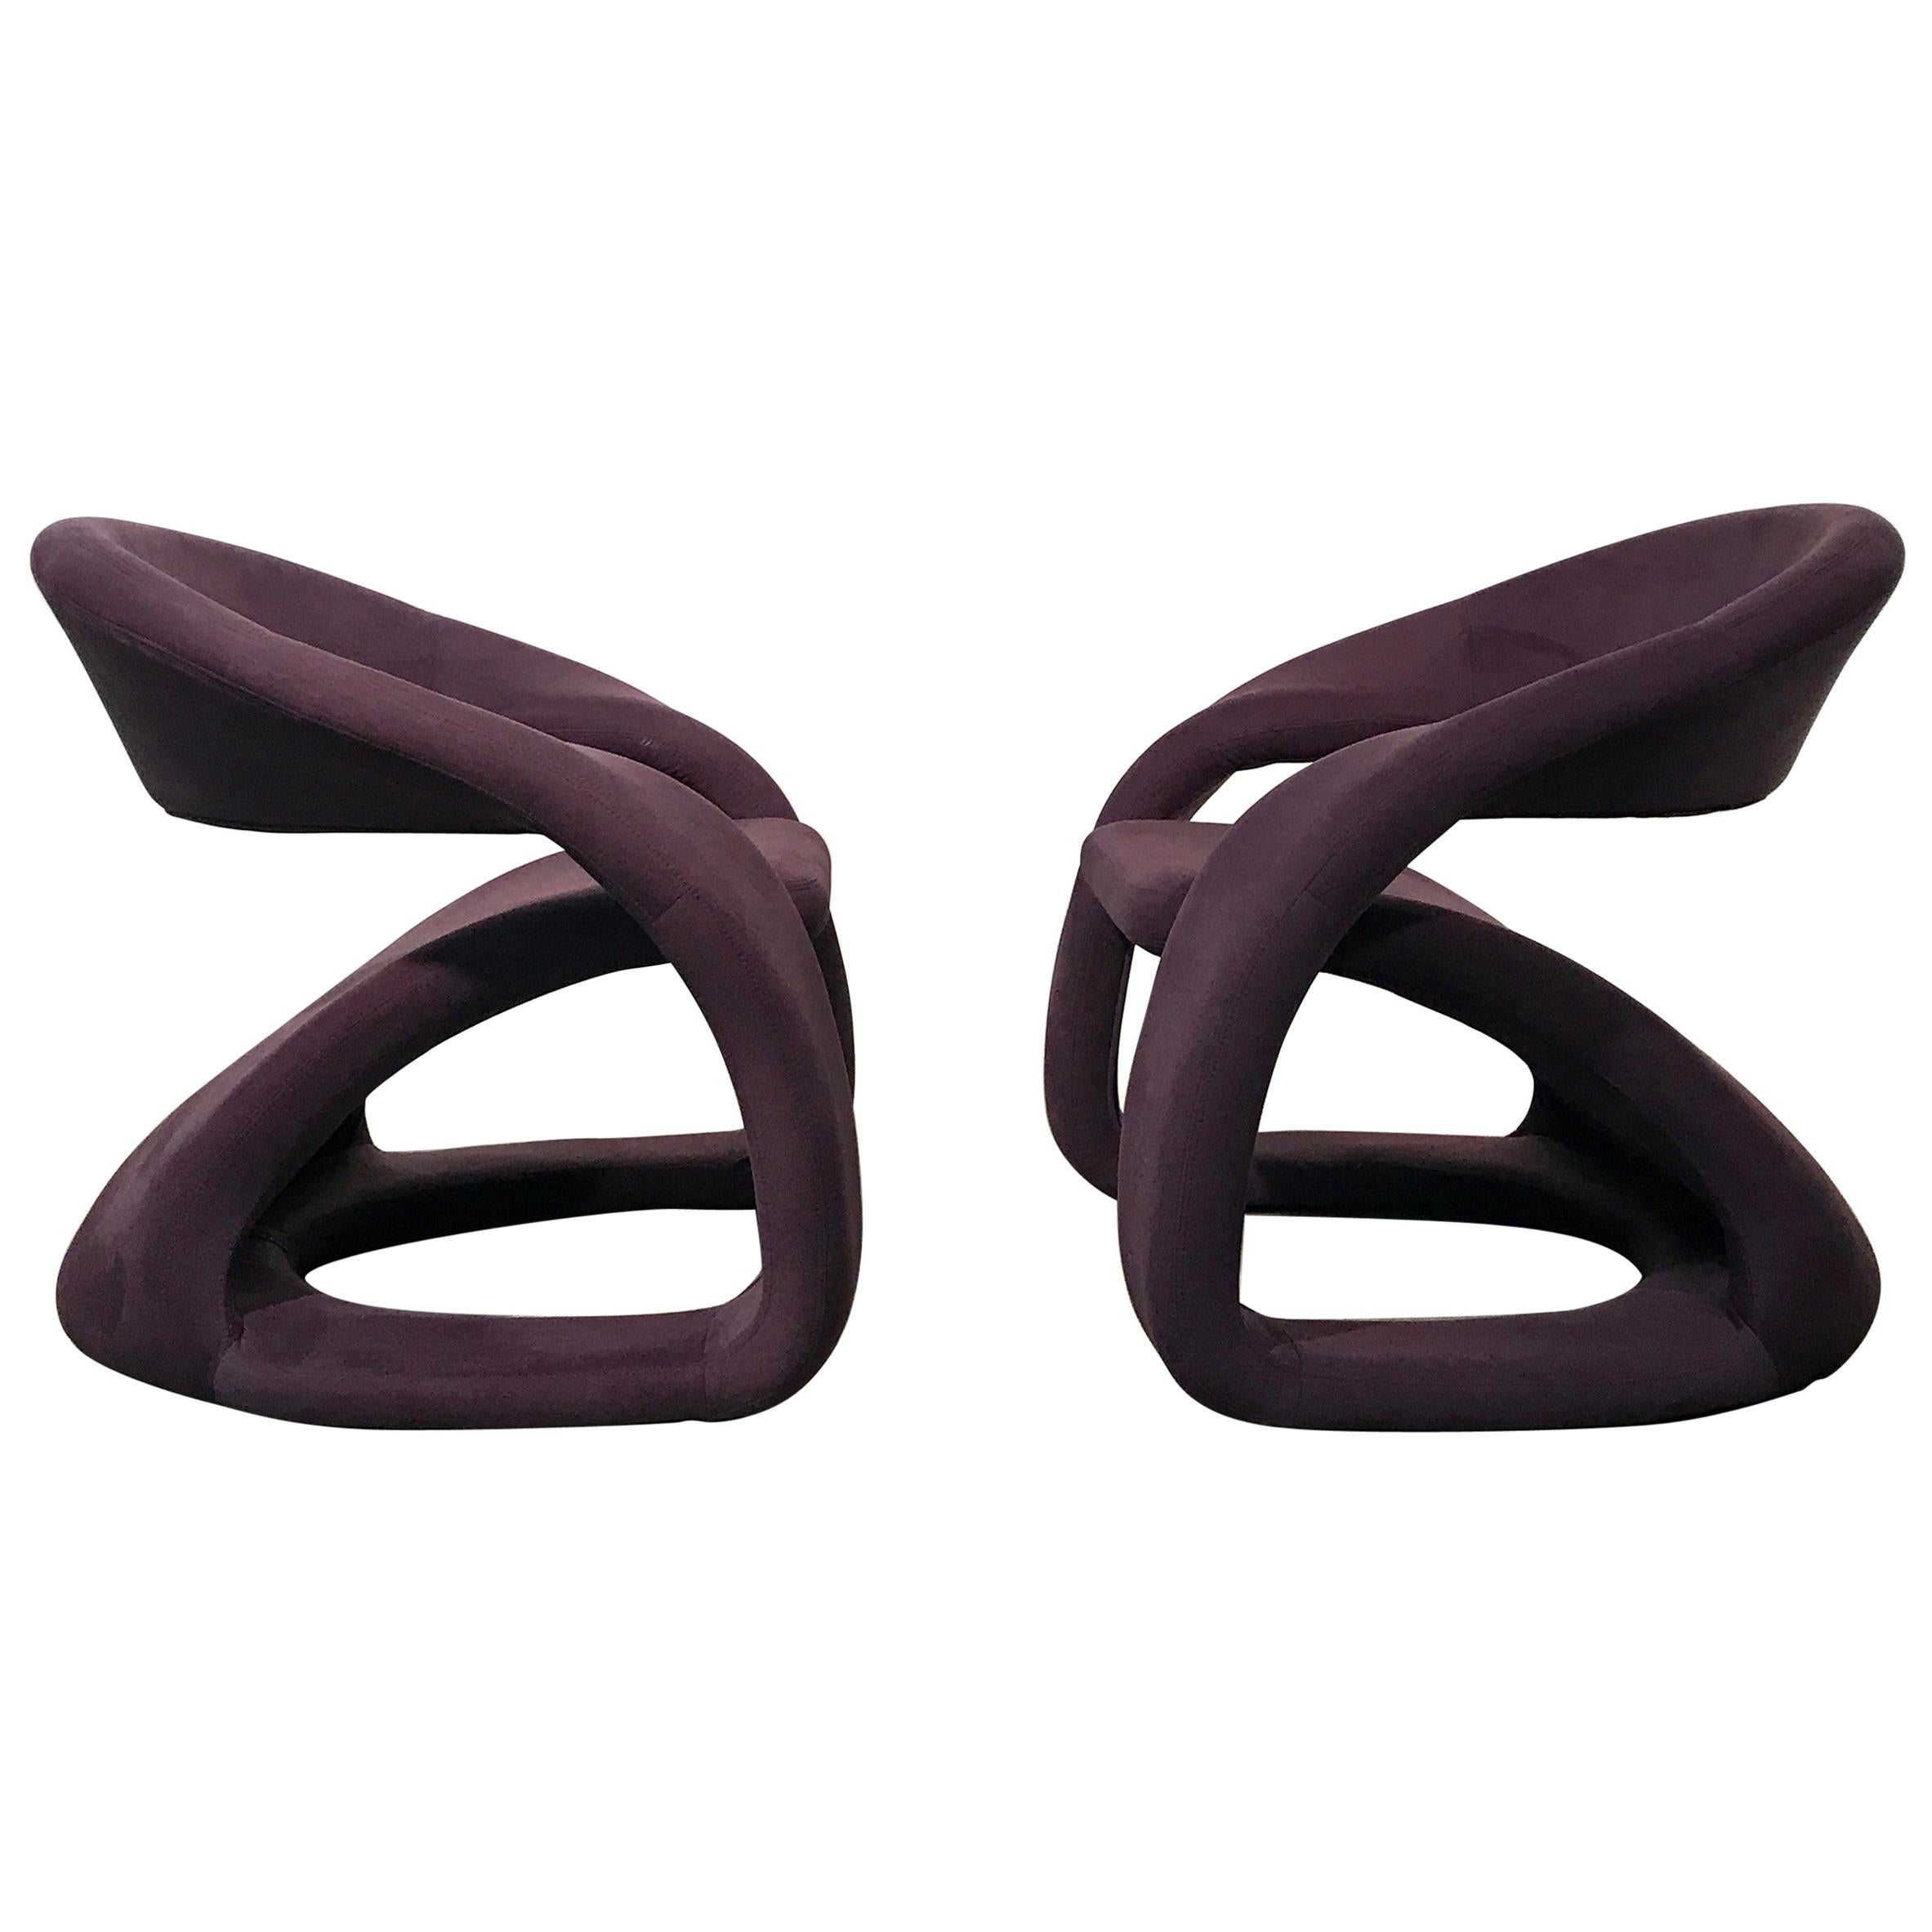 Pair of Sculptural Cantilever Chairs with Ottoman Memphis Style